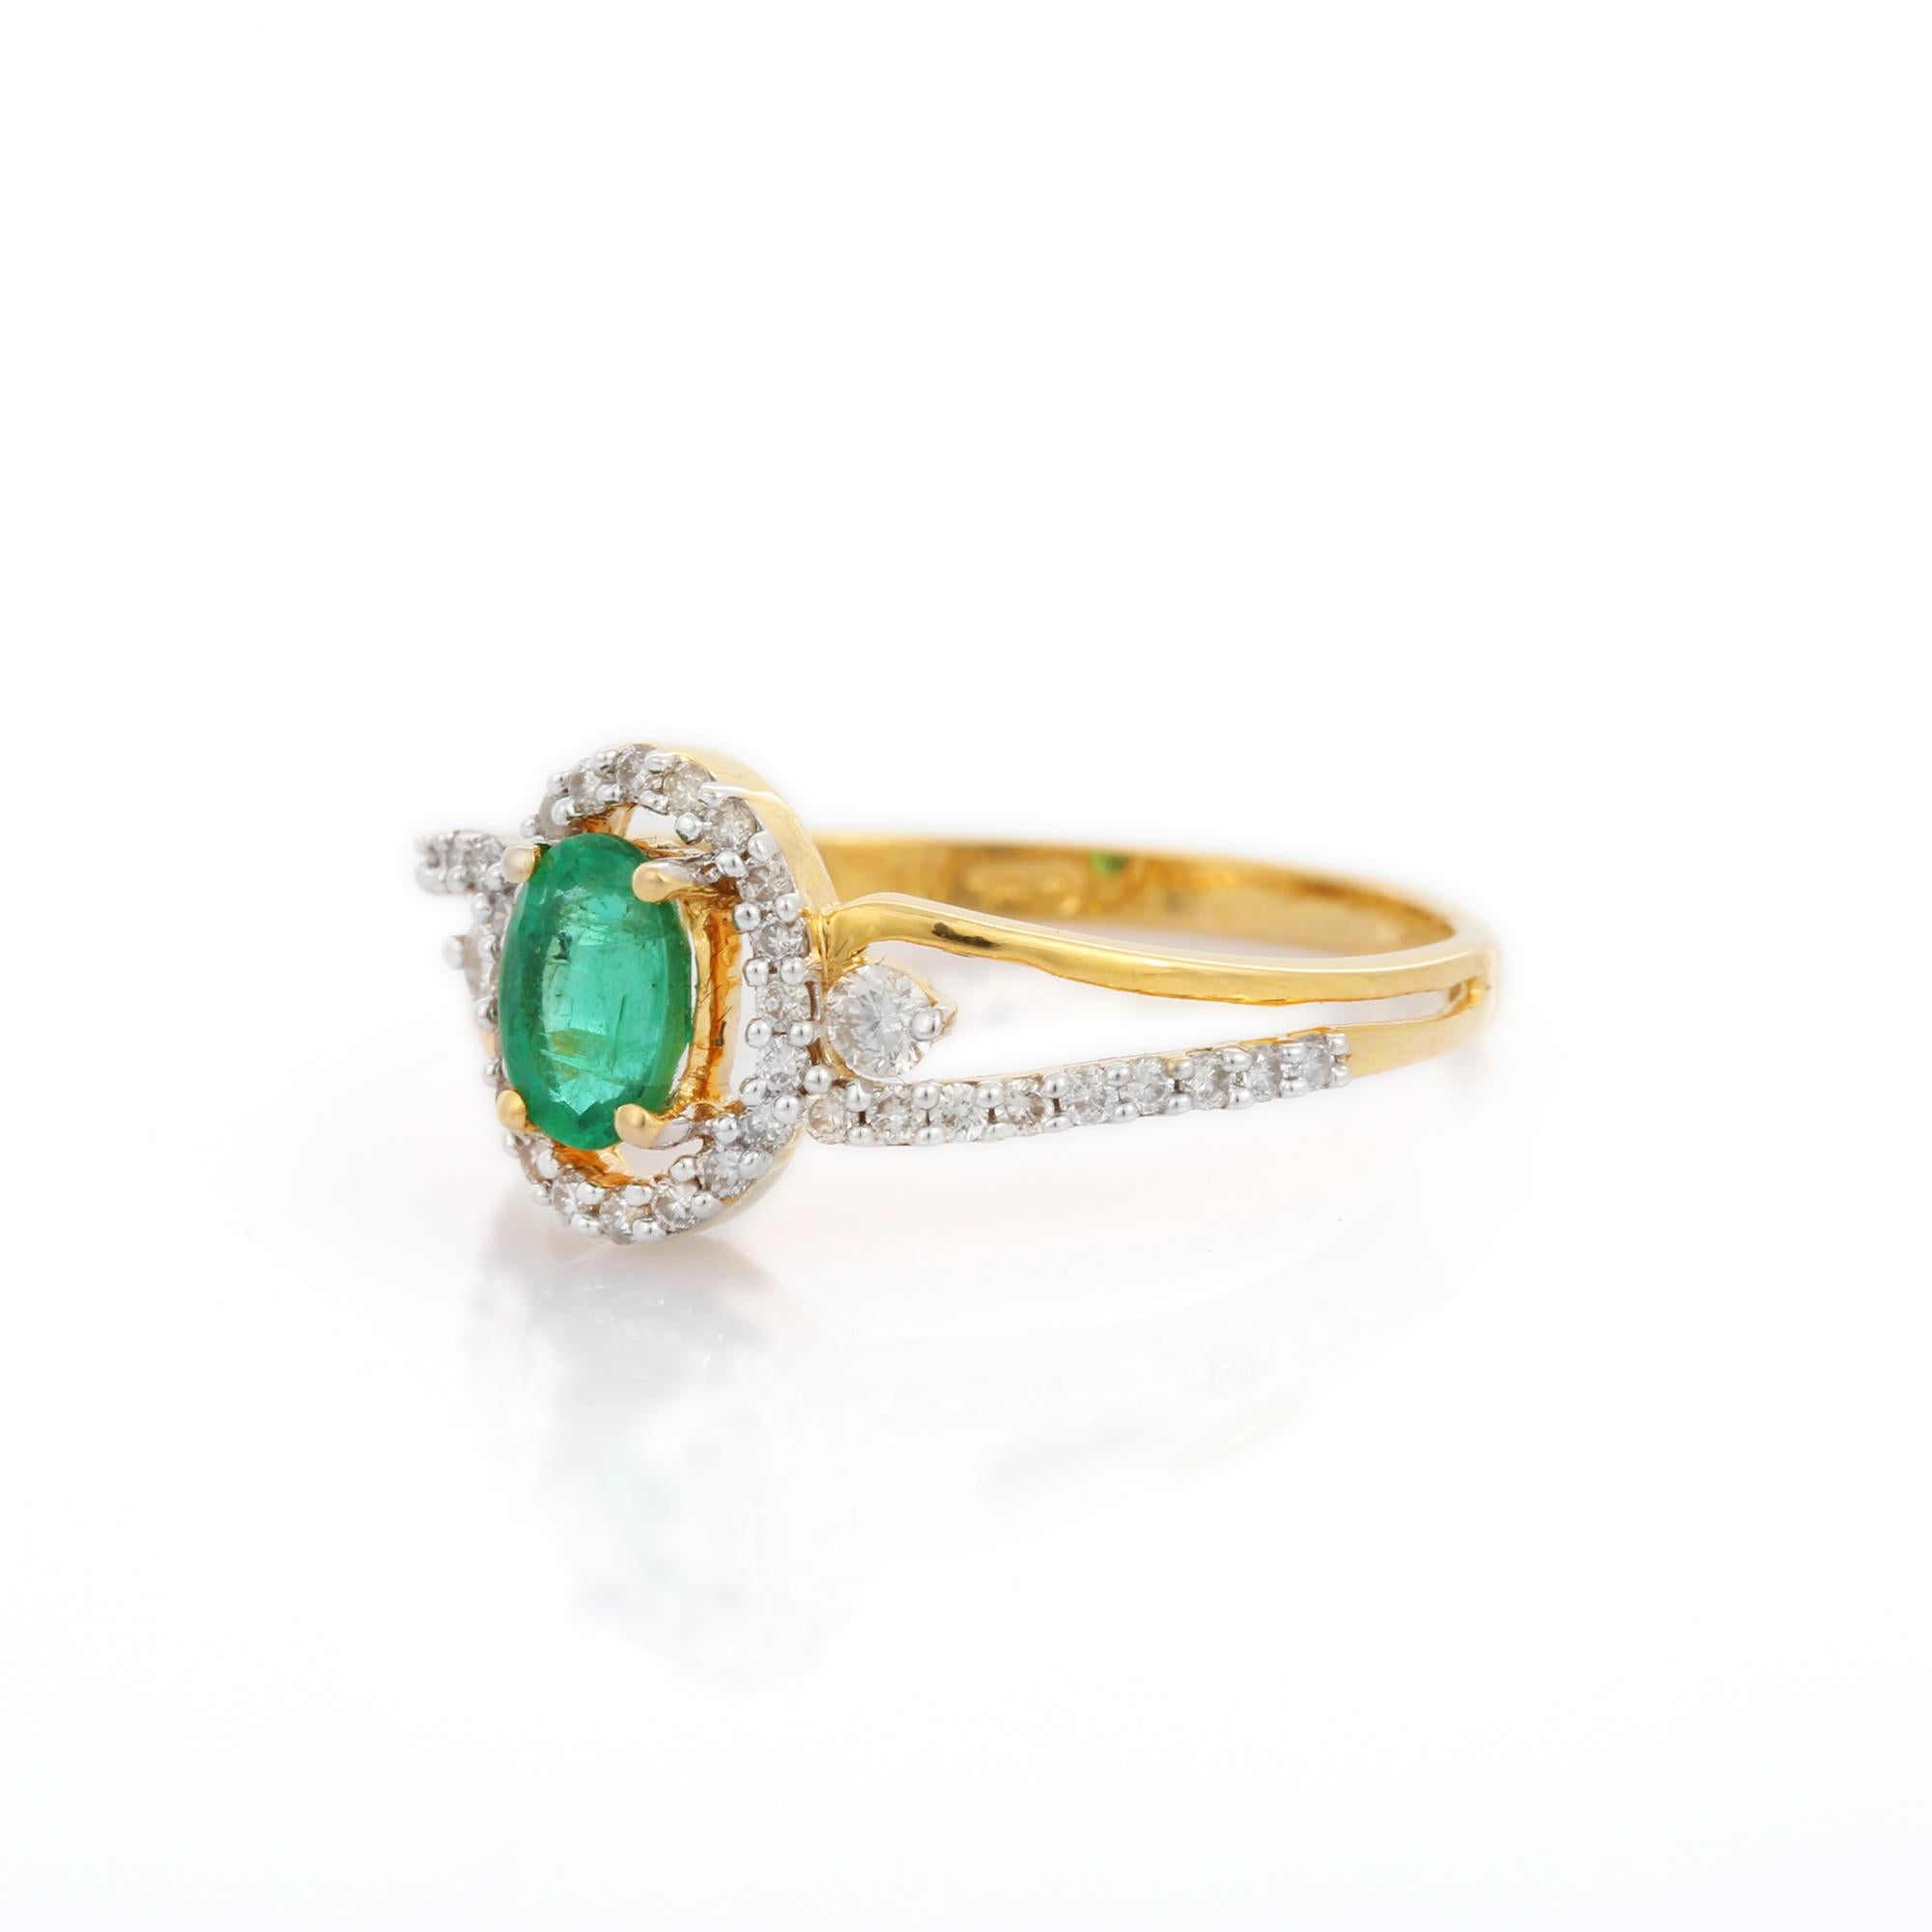 For Sale:  Solid 18k Yellow Gold Classic Emerald Engagement Ring with Diamonds 3